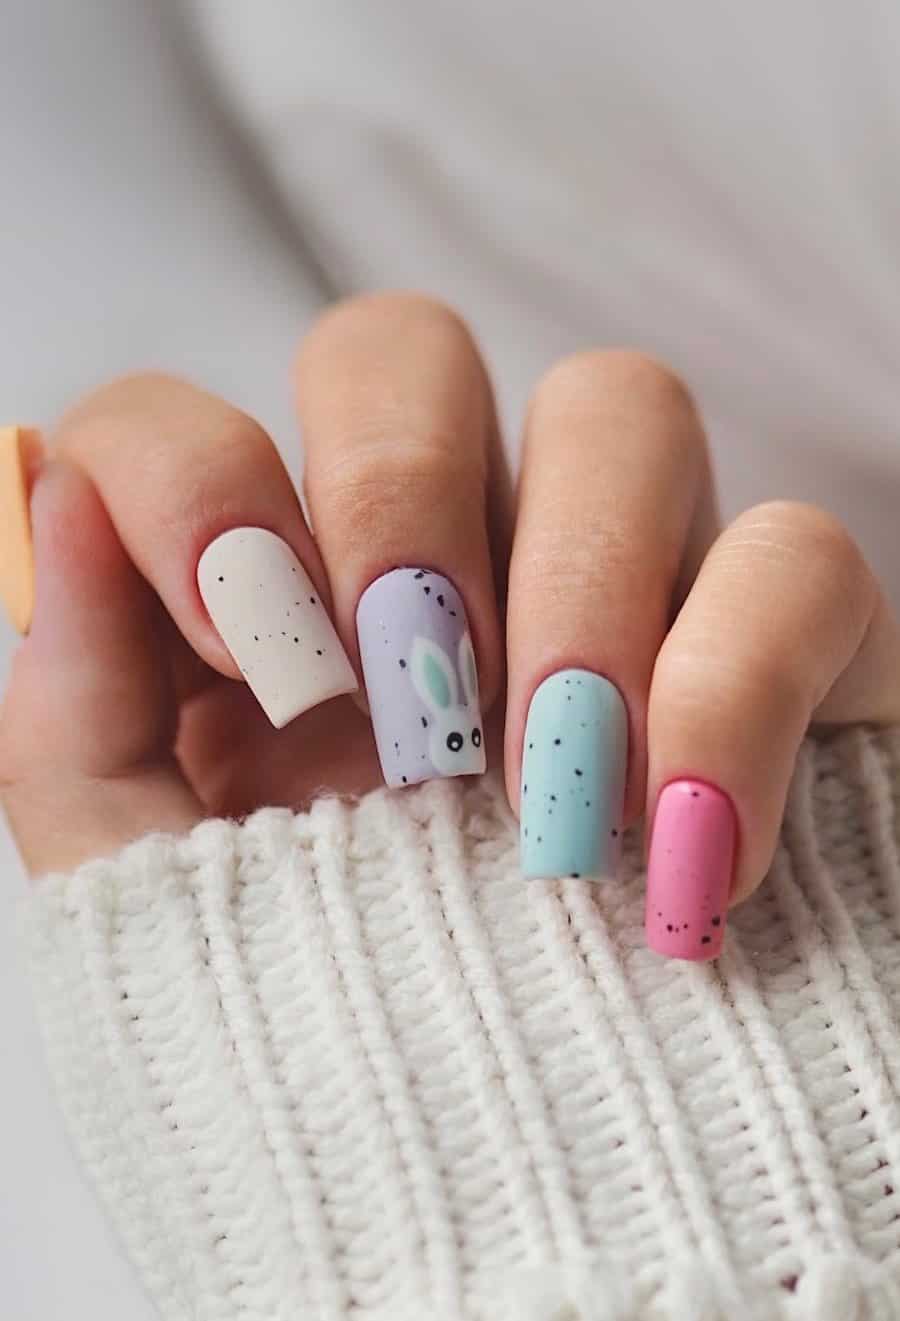 Long square nails in pastel gradient colors with black speckles, a matte finish, and bunny nail art